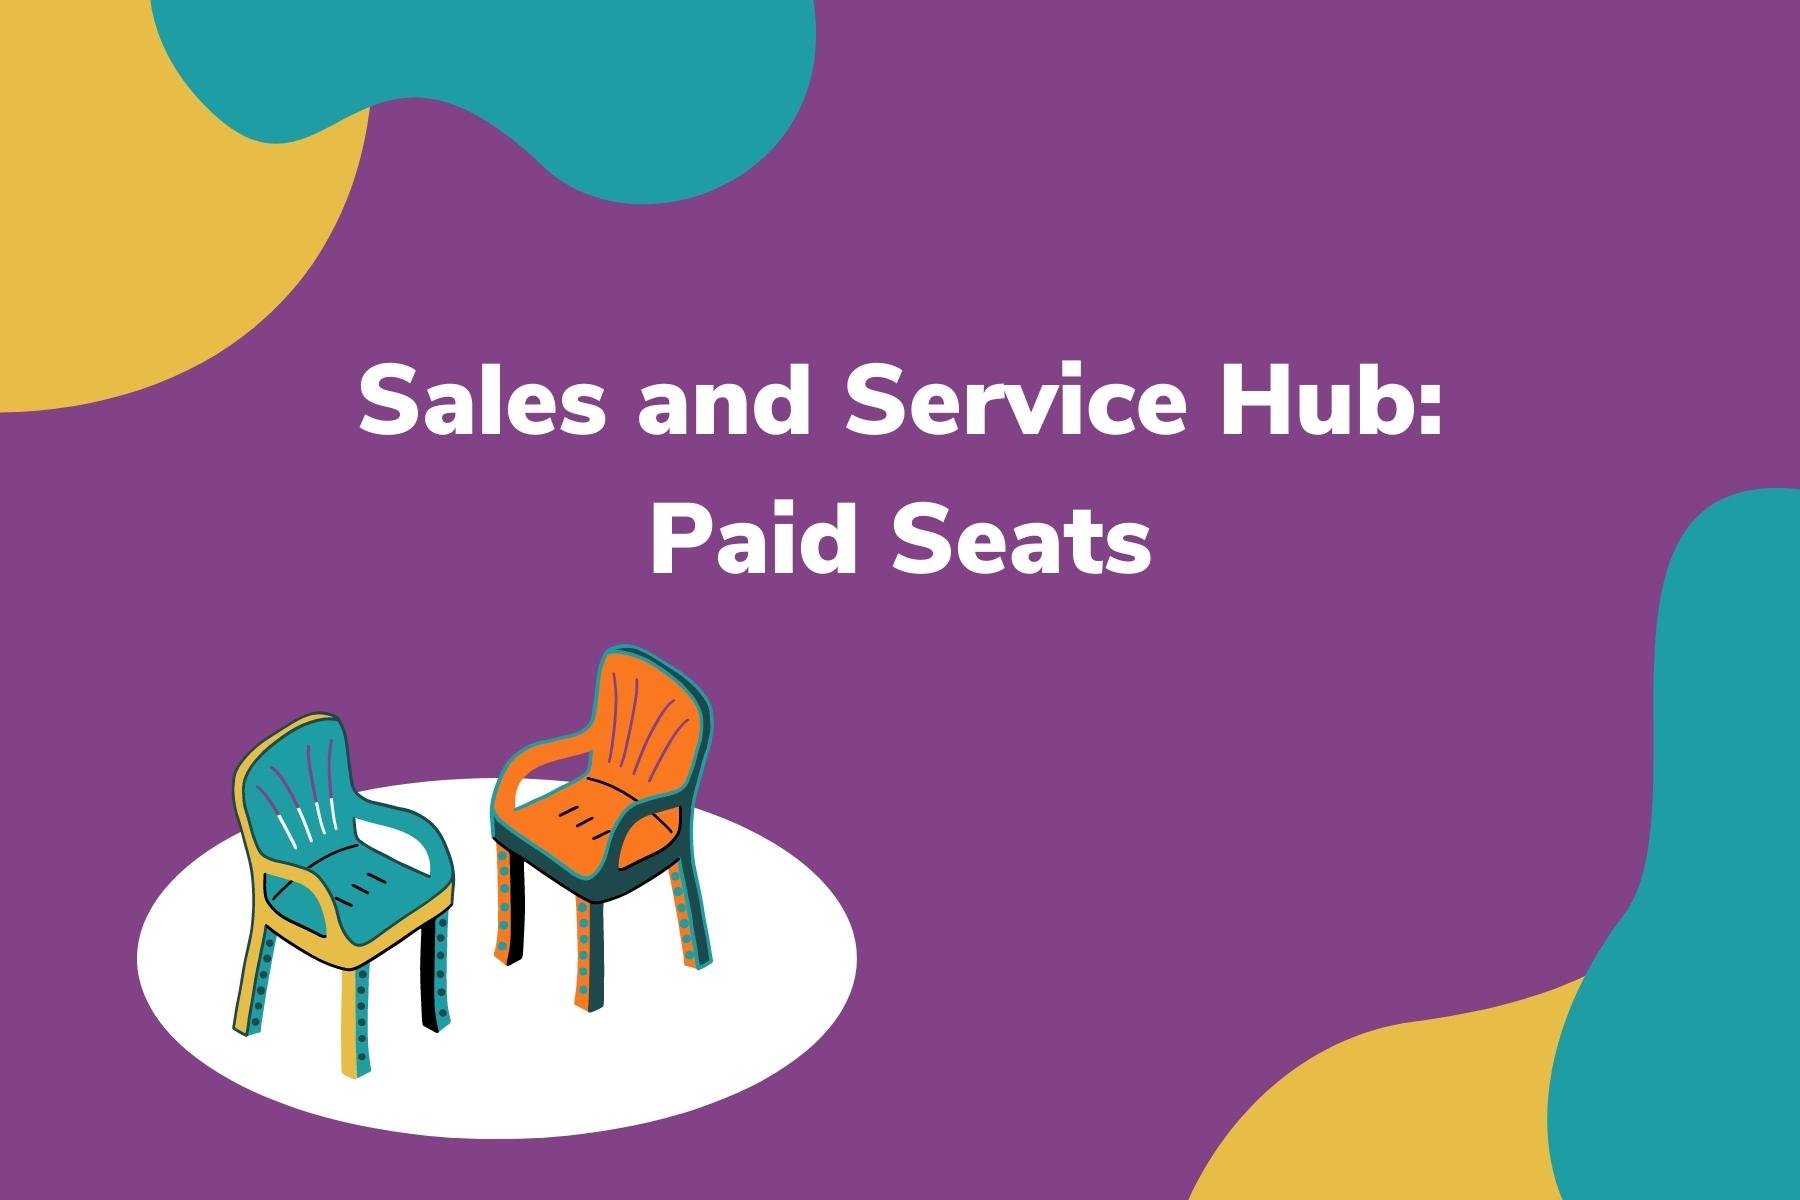 HubSpot Paid Seats. What are they?